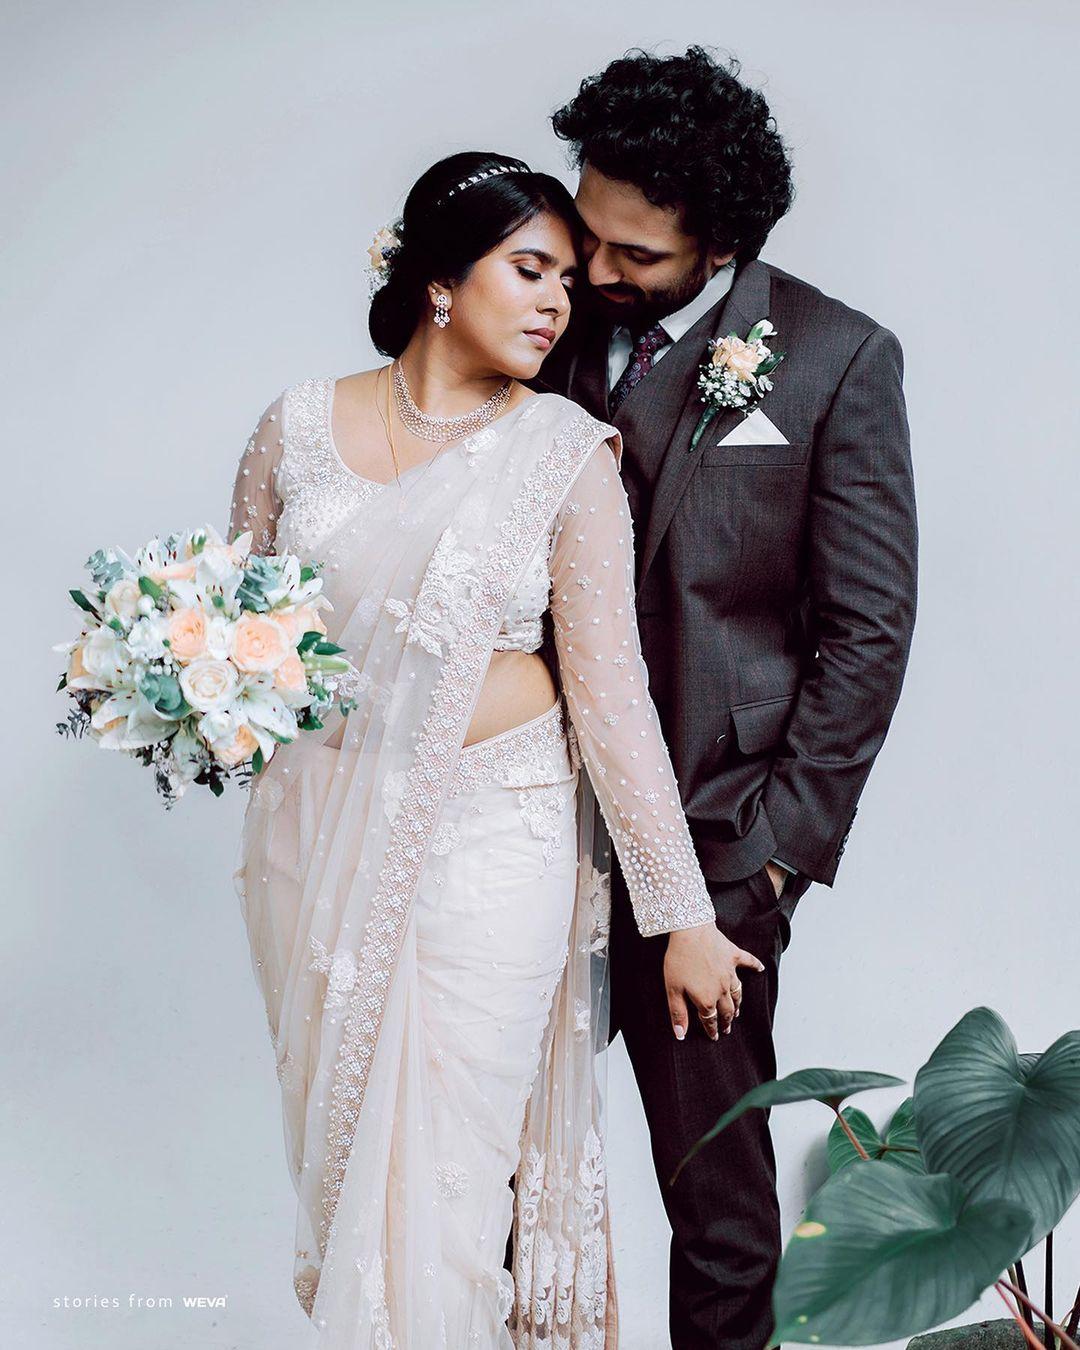 Christian Bridal Gown with Pearl Embellished - Bridal Diaries